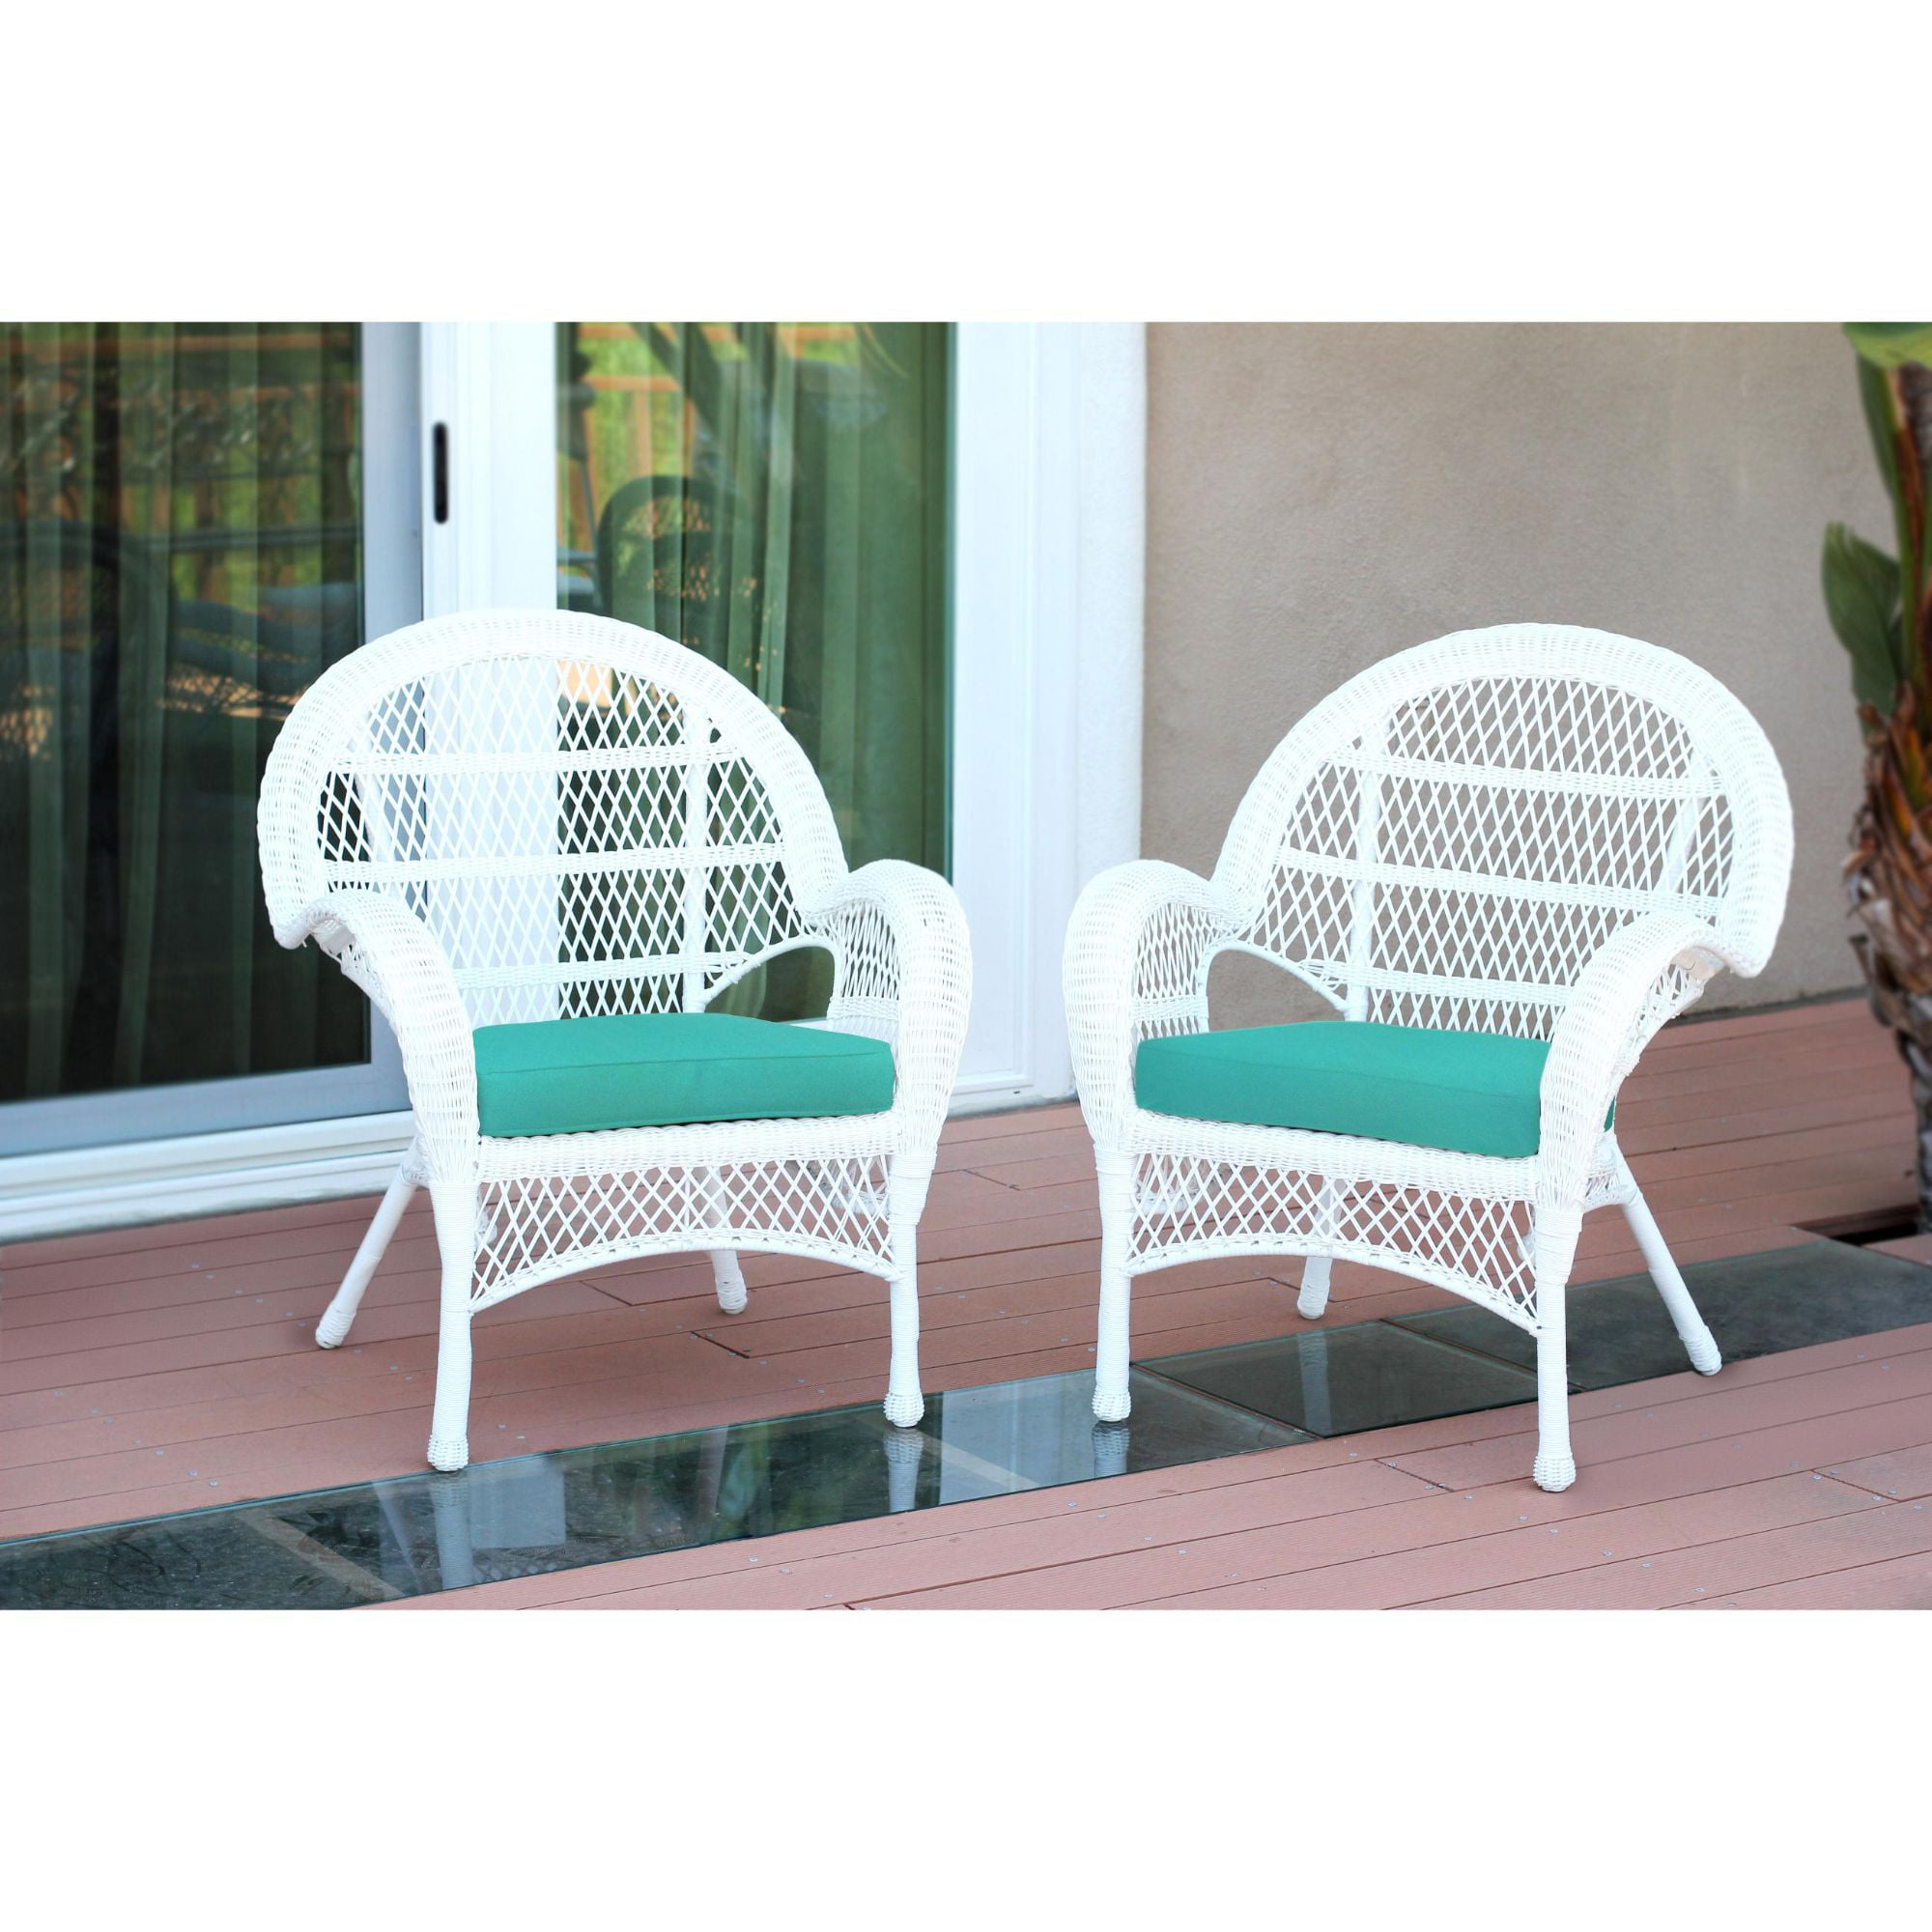 Set of 2 White Wicker Outdoor Furniture Patio Chairs